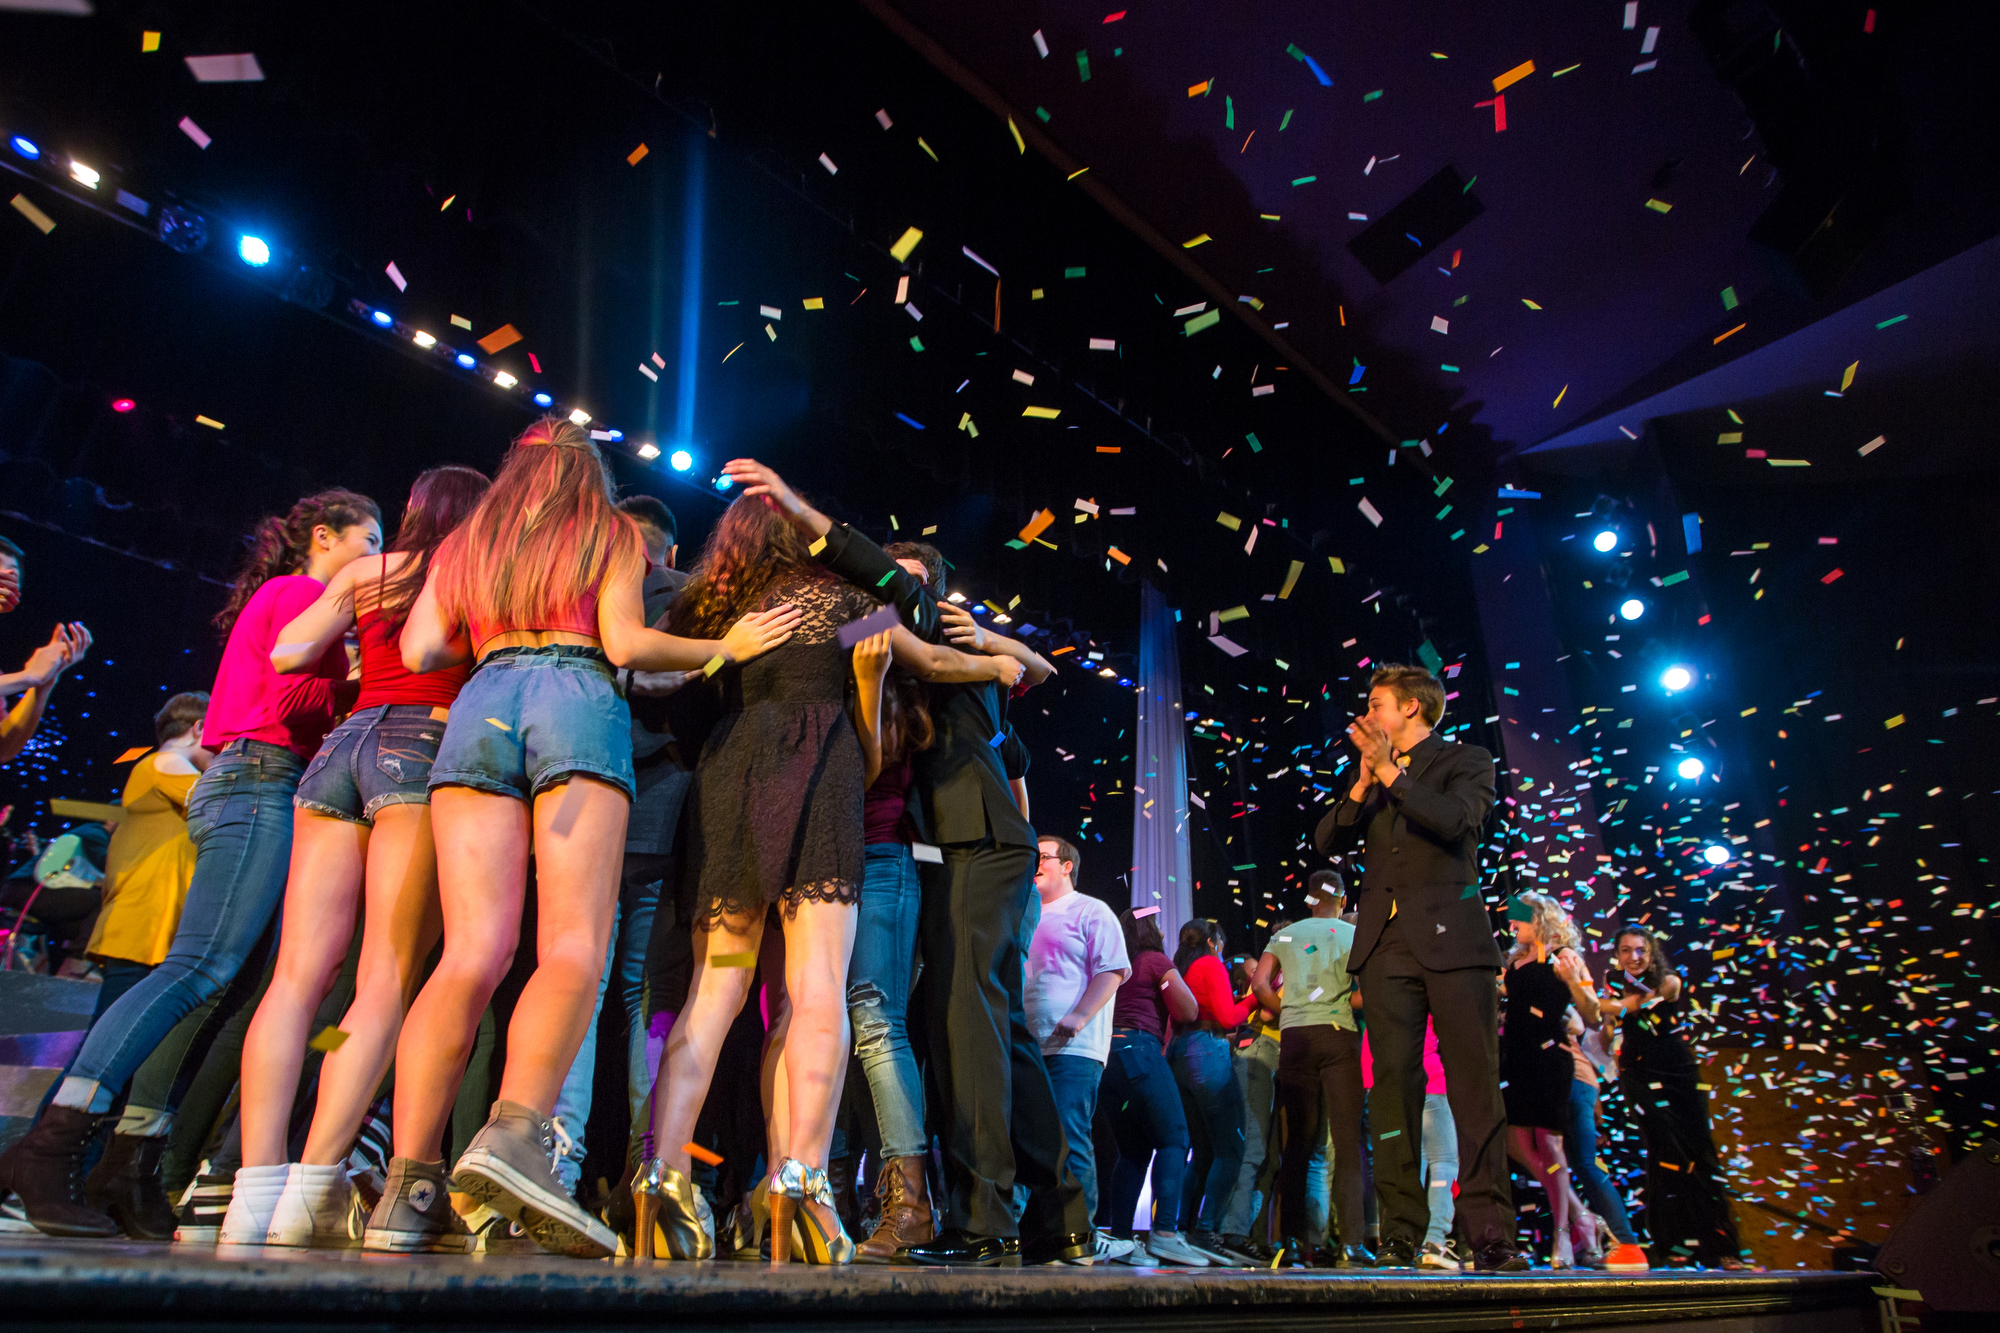  Students celebrate as the winners of the 15th annual Future Stars talent competition are announced at Pioneer High School on Saturday, January 28, 2017. 23 acts and about 90 students participated in the citywide competition. Matt Weigand | The Ann A